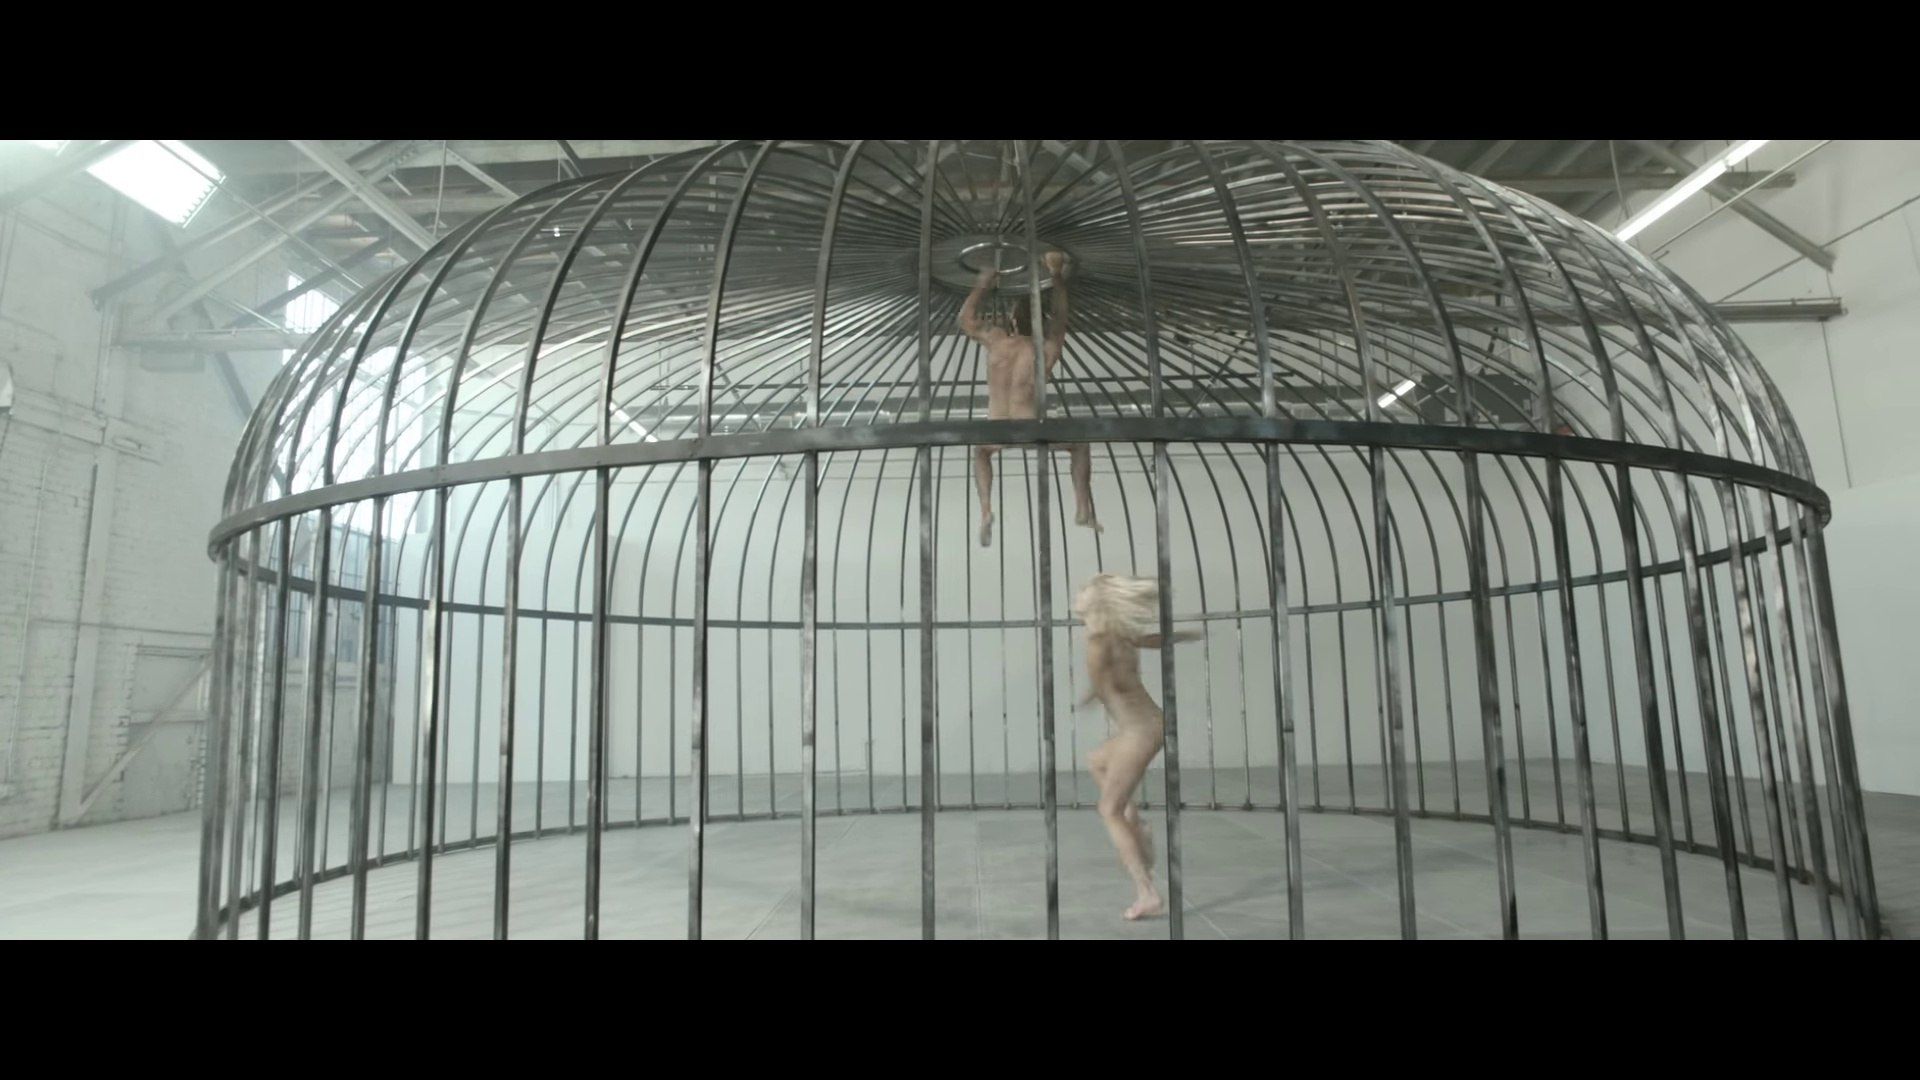 Sia - Elastic Heart feat. Shia LaBeouf & Maddie Ziegler (Official Video) -  video Dailymotion